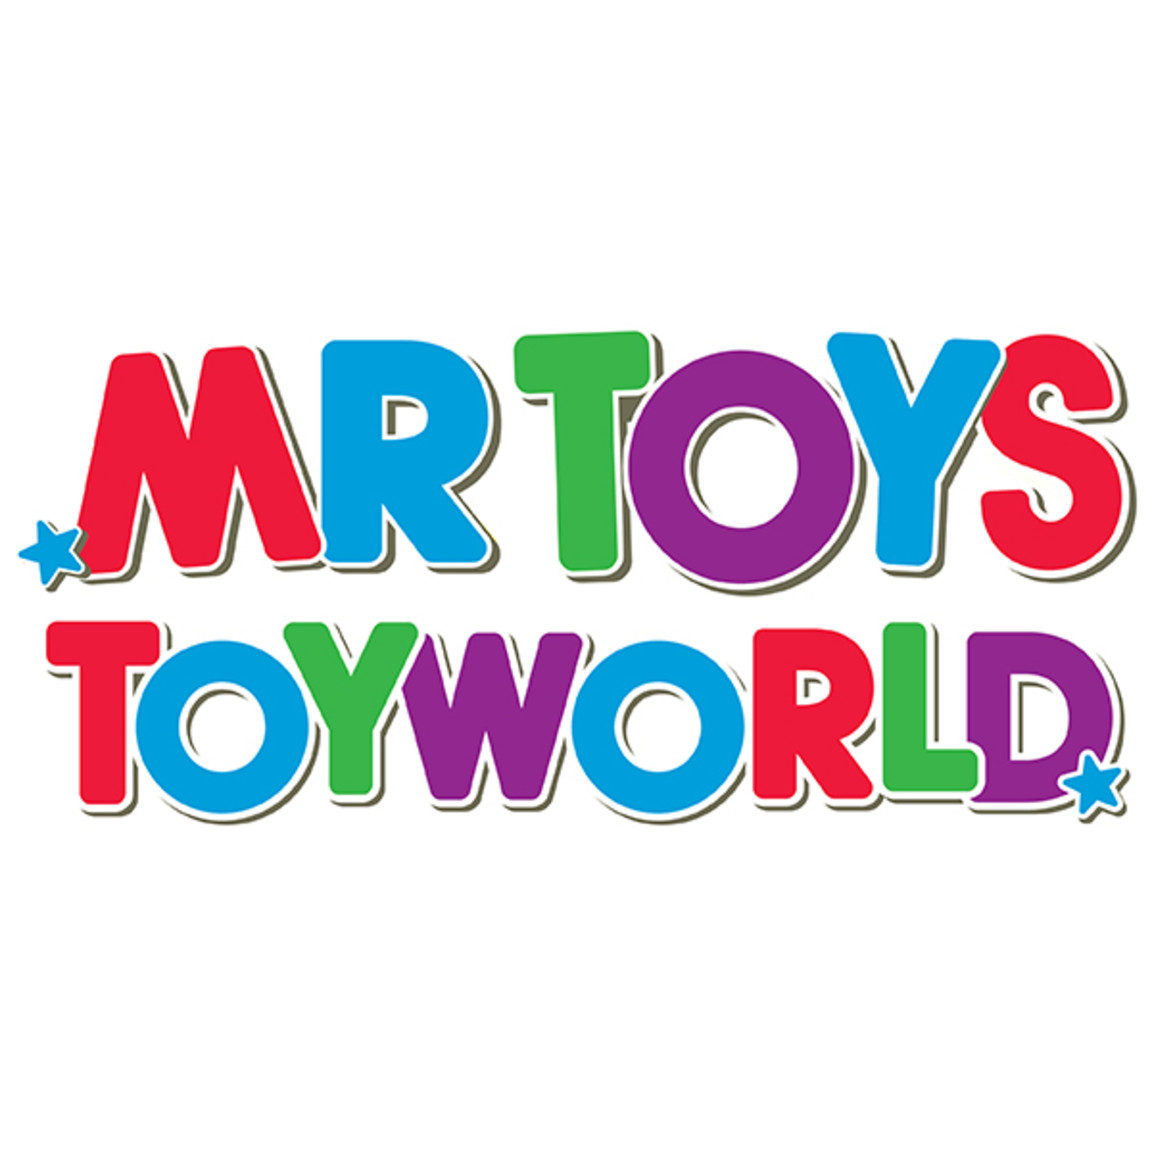 toy world group